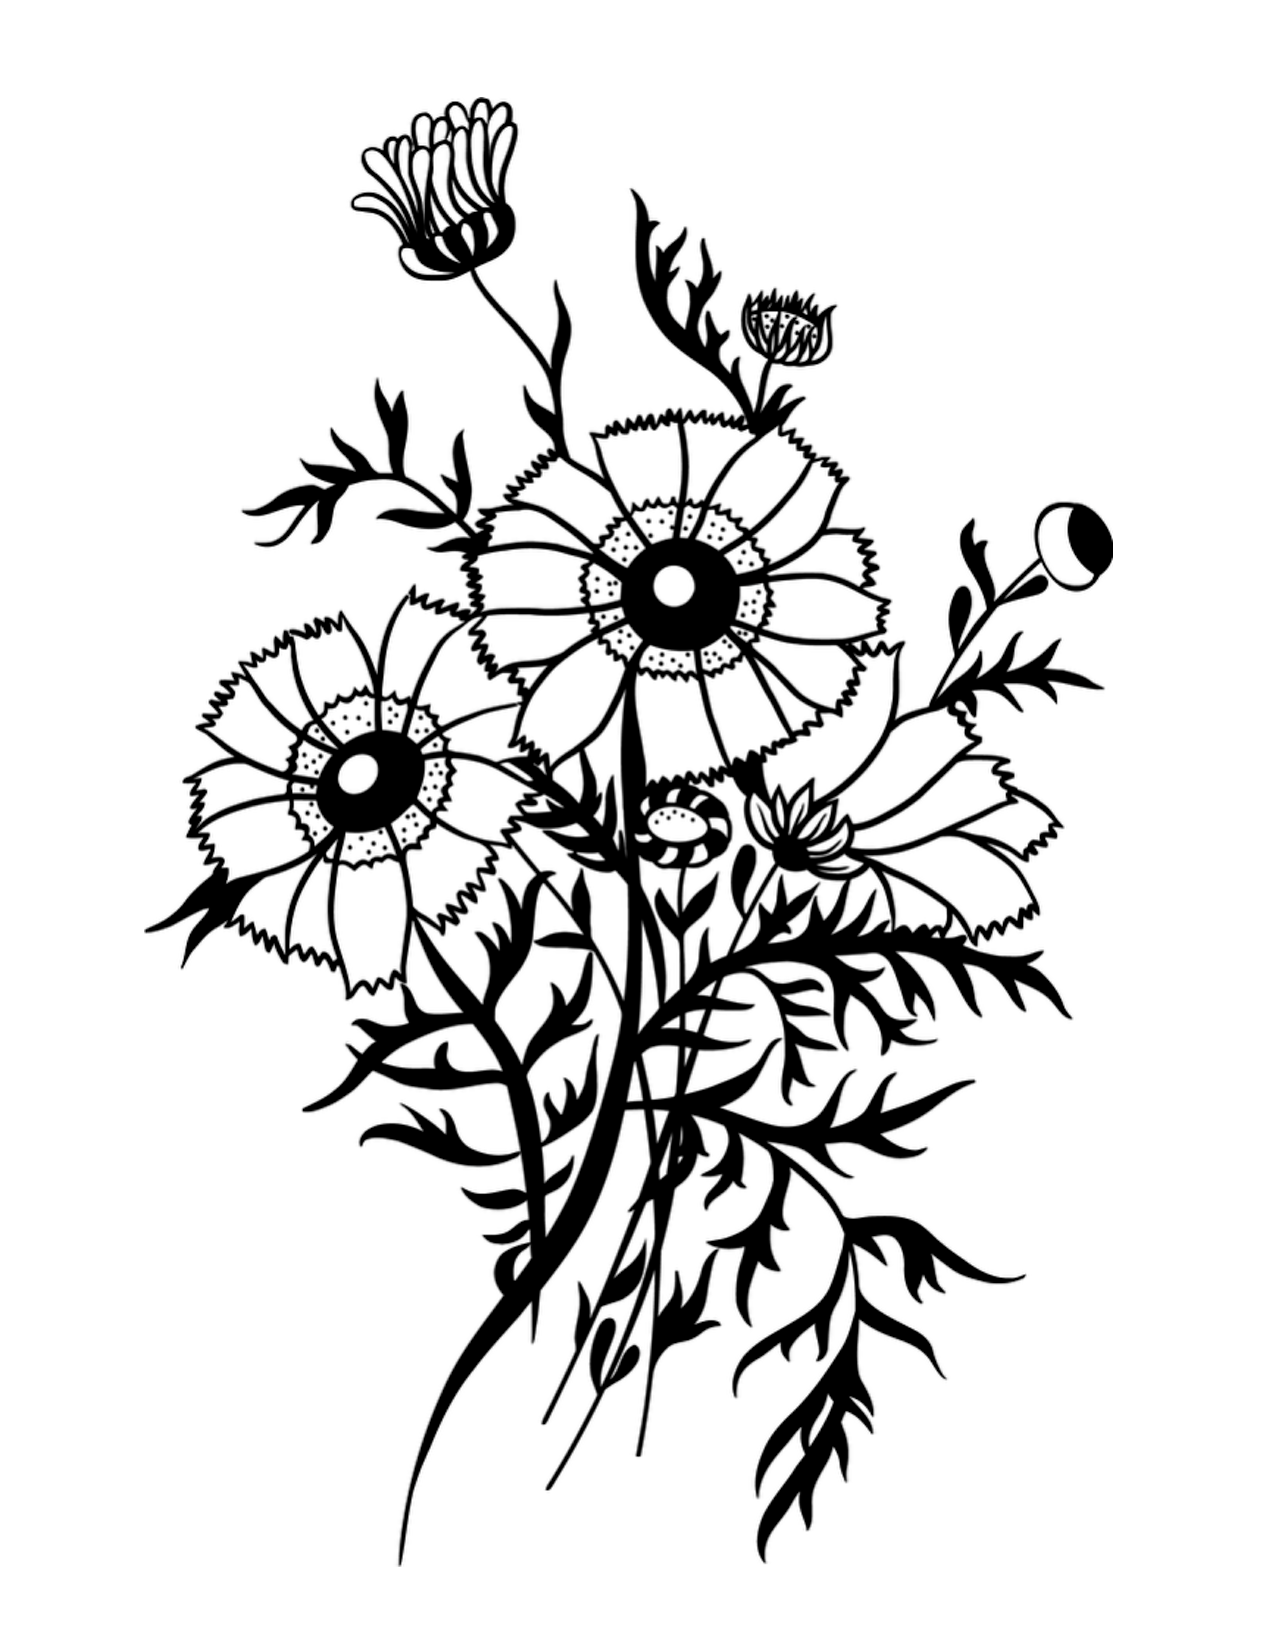 of plant coloring page label the parts you know and color | yooall.